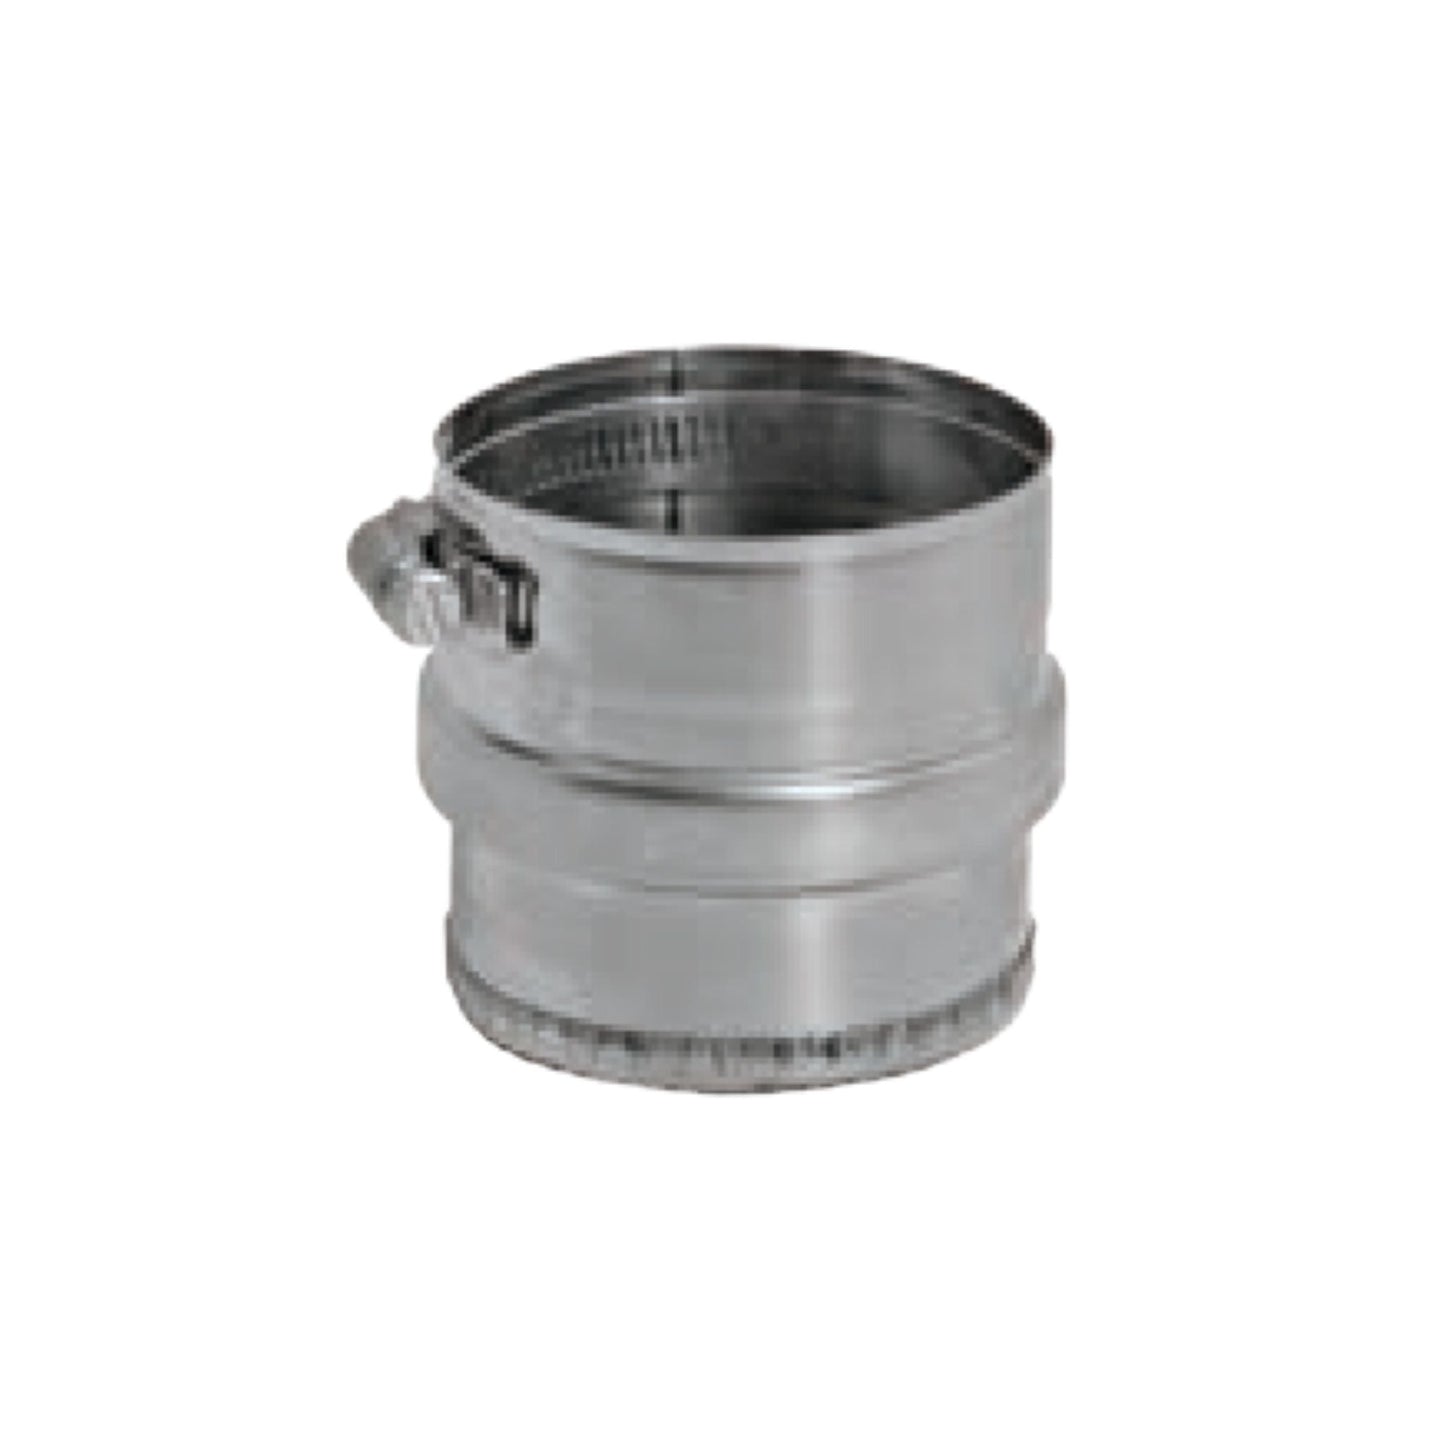 DuraVent FasNSeal 14" 29-4C Stainless Steel Tee Cap